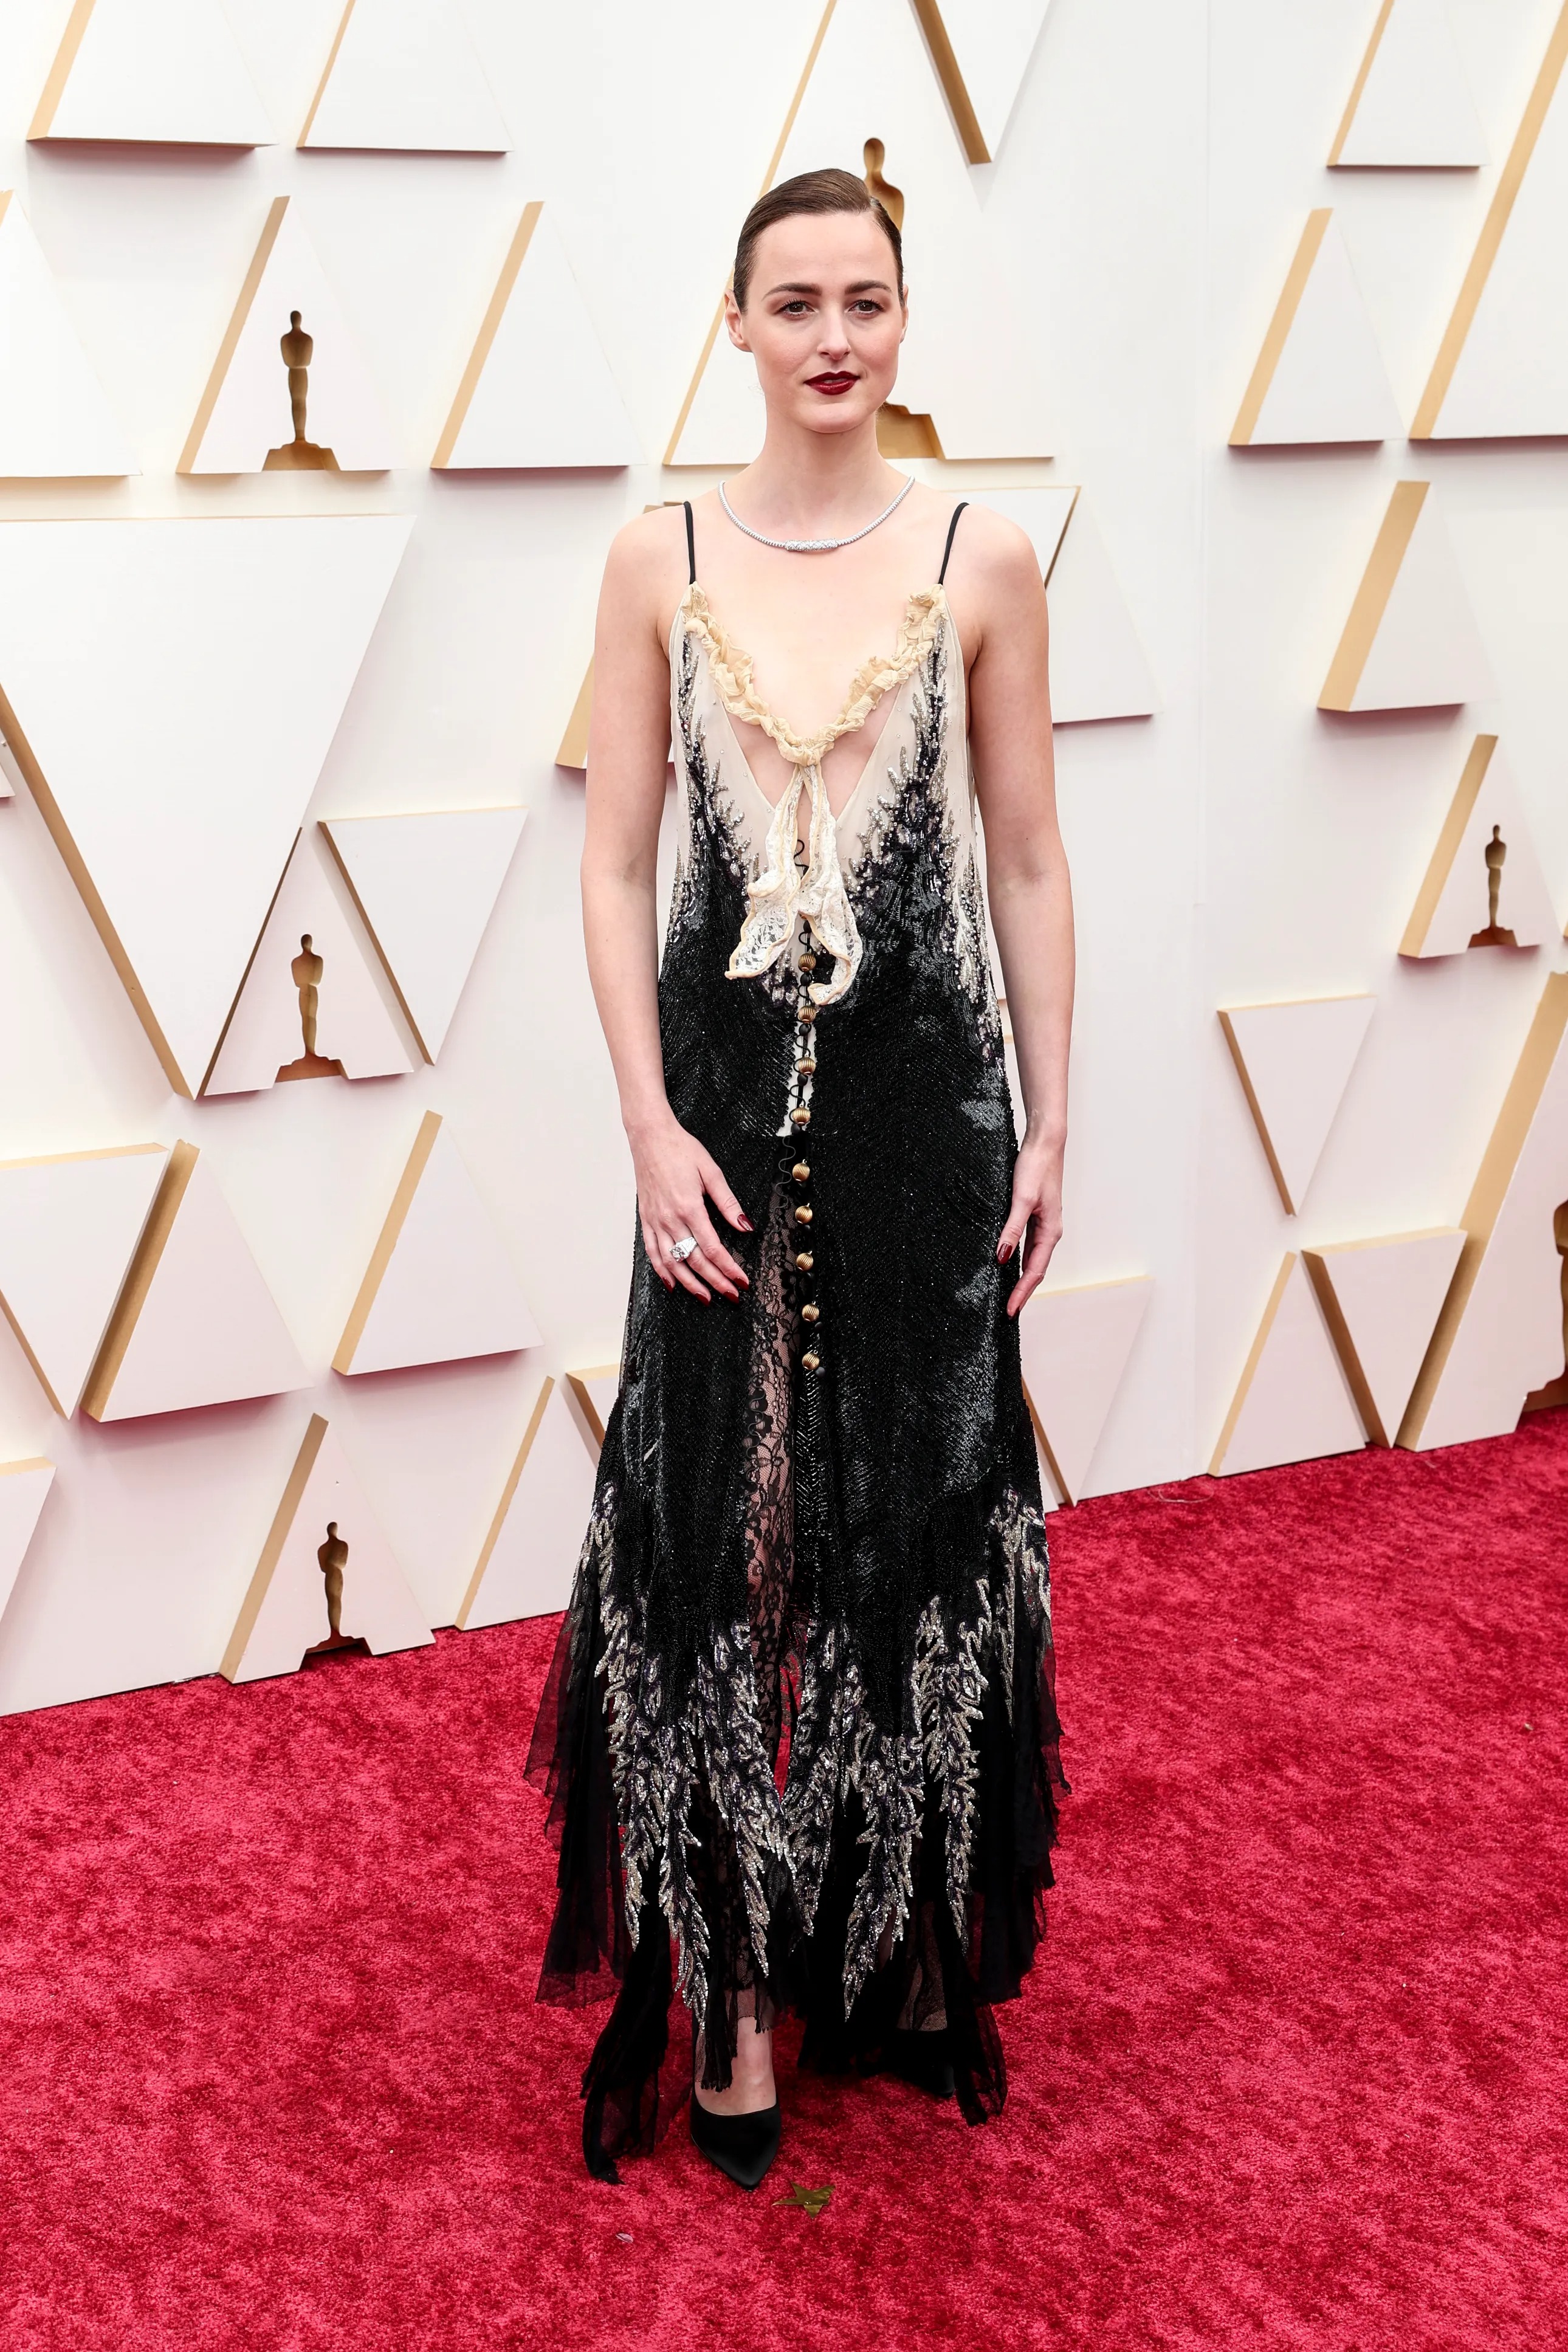 Louis Vuitton Embroidered Velvet Dress worn by Renate Reinsve on the Oscars  Red Carpet on March 27, 2022